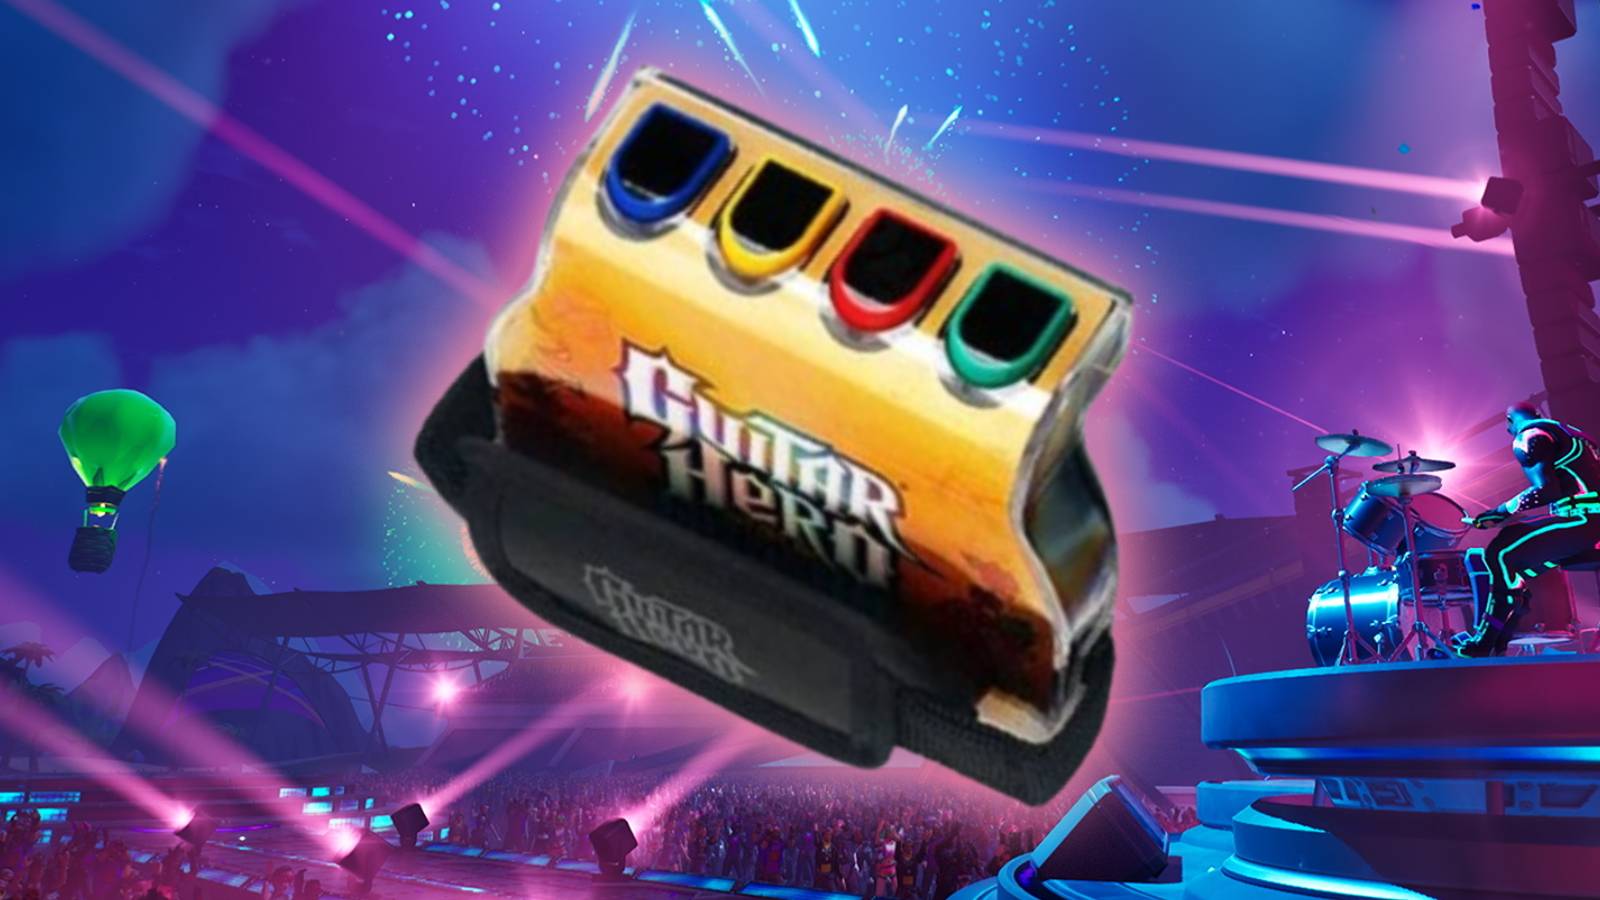 An image of the Guitar Hero Guitar Grip controller with Fortnite Festival in the background.